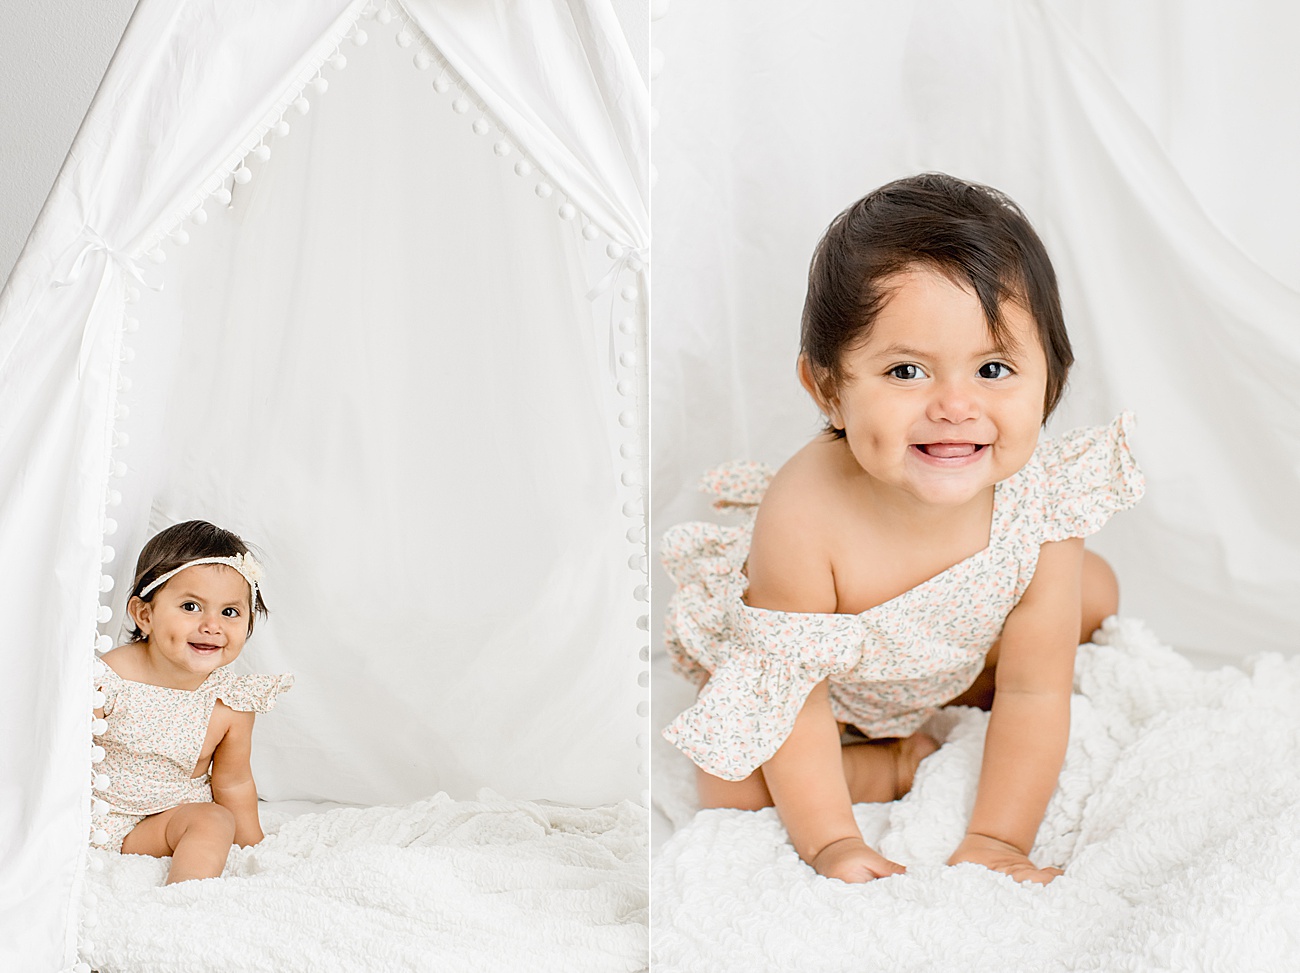 Smiling baby girl during one year milestone photos as she peeks outside of the white teepee. Photos by Sana Ahmed Photography.